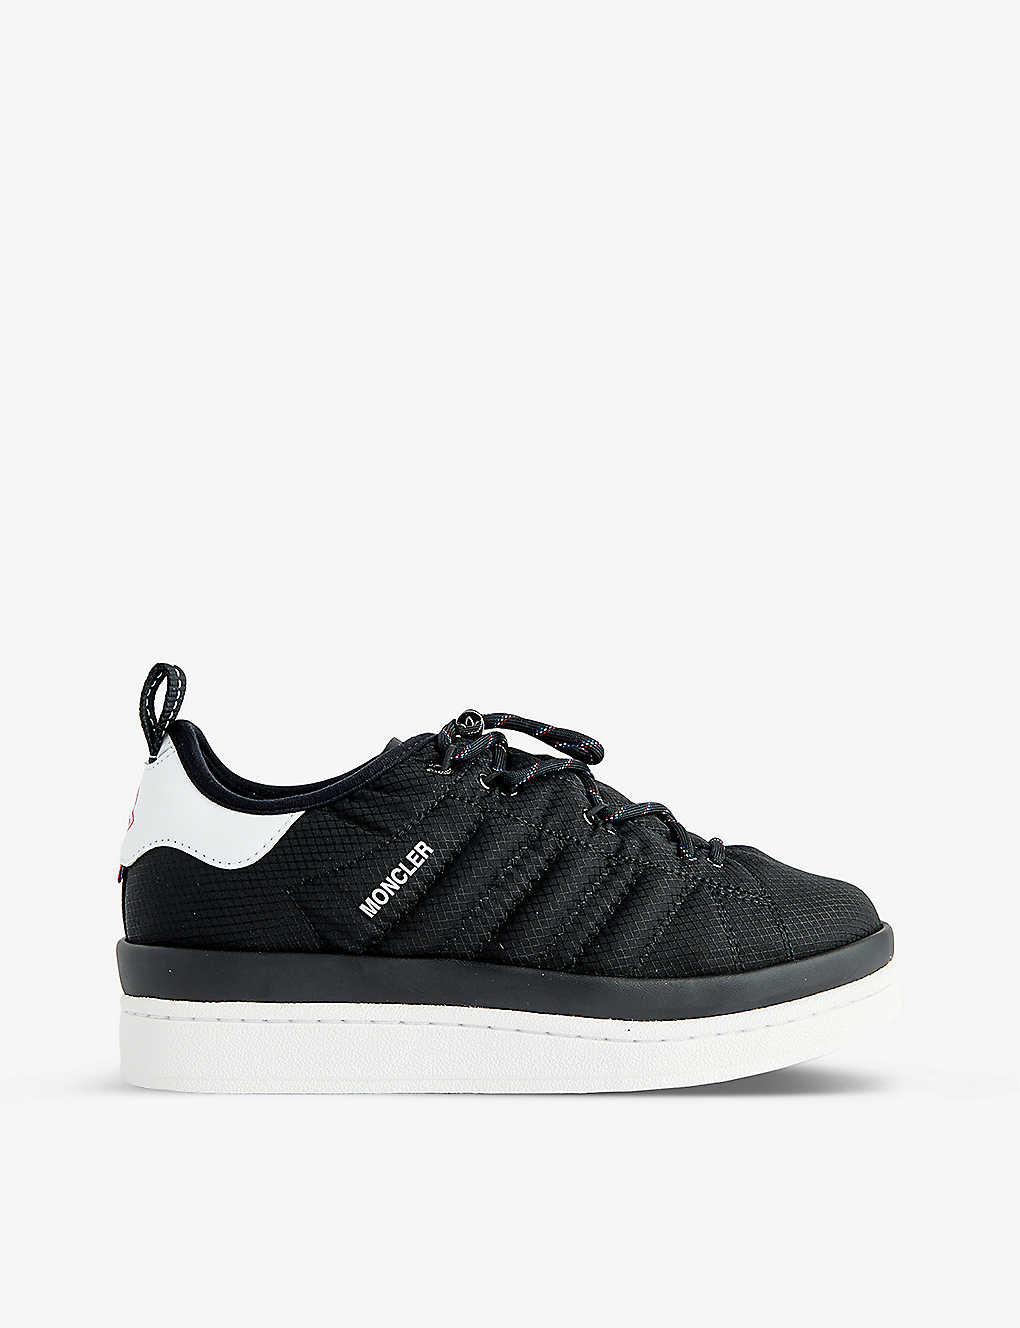 Moncler Genius Moncler X Adidas Campus Leather Trainers In Black